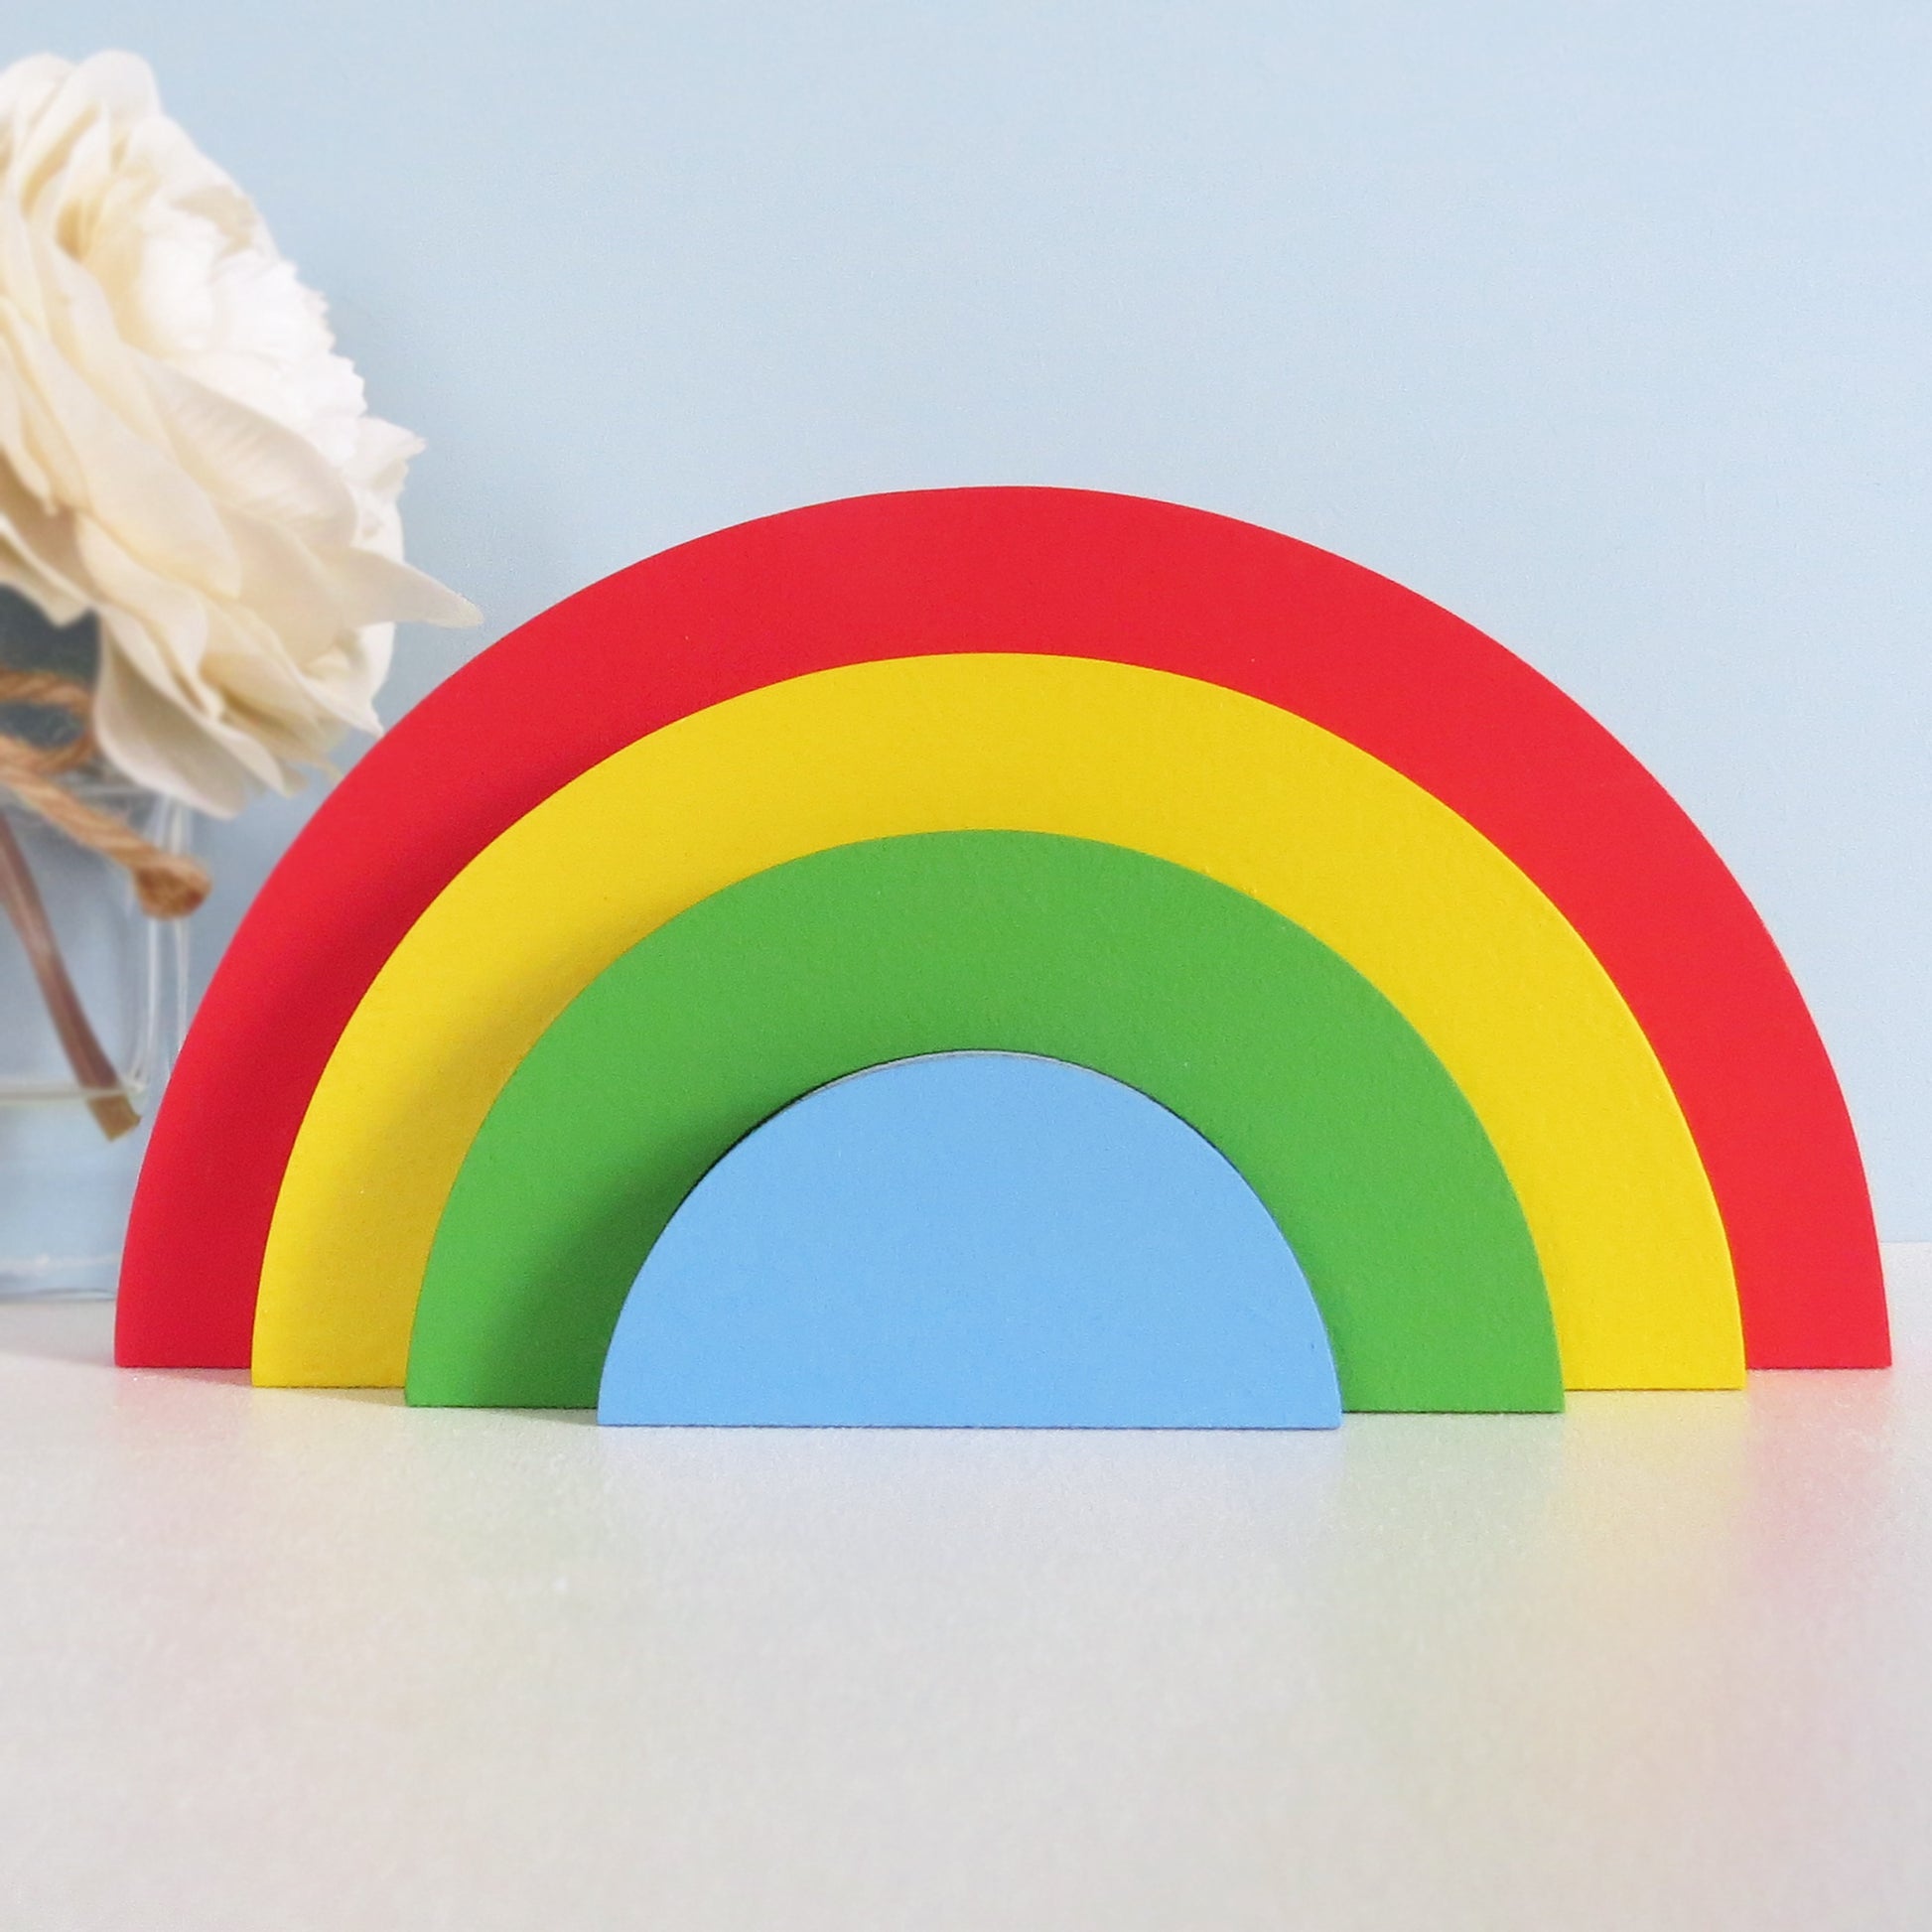 Childrens nursery 4 section rainbow shelf stacker painted in bright colours.